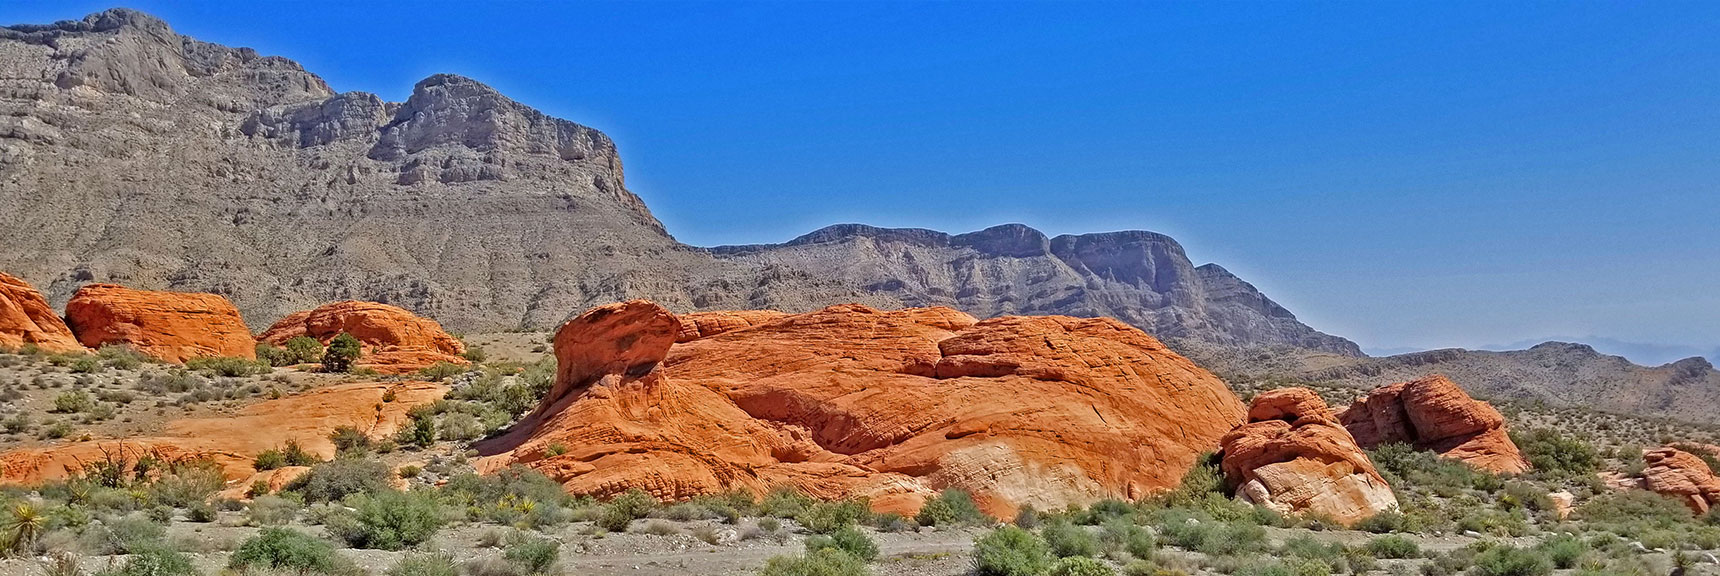 View Back Toward the Northern Rim of the Canyon, Location of Initial Approach | Little Red Rock Las Vegas, Nevada, Near La Madre Mountains Wilderness